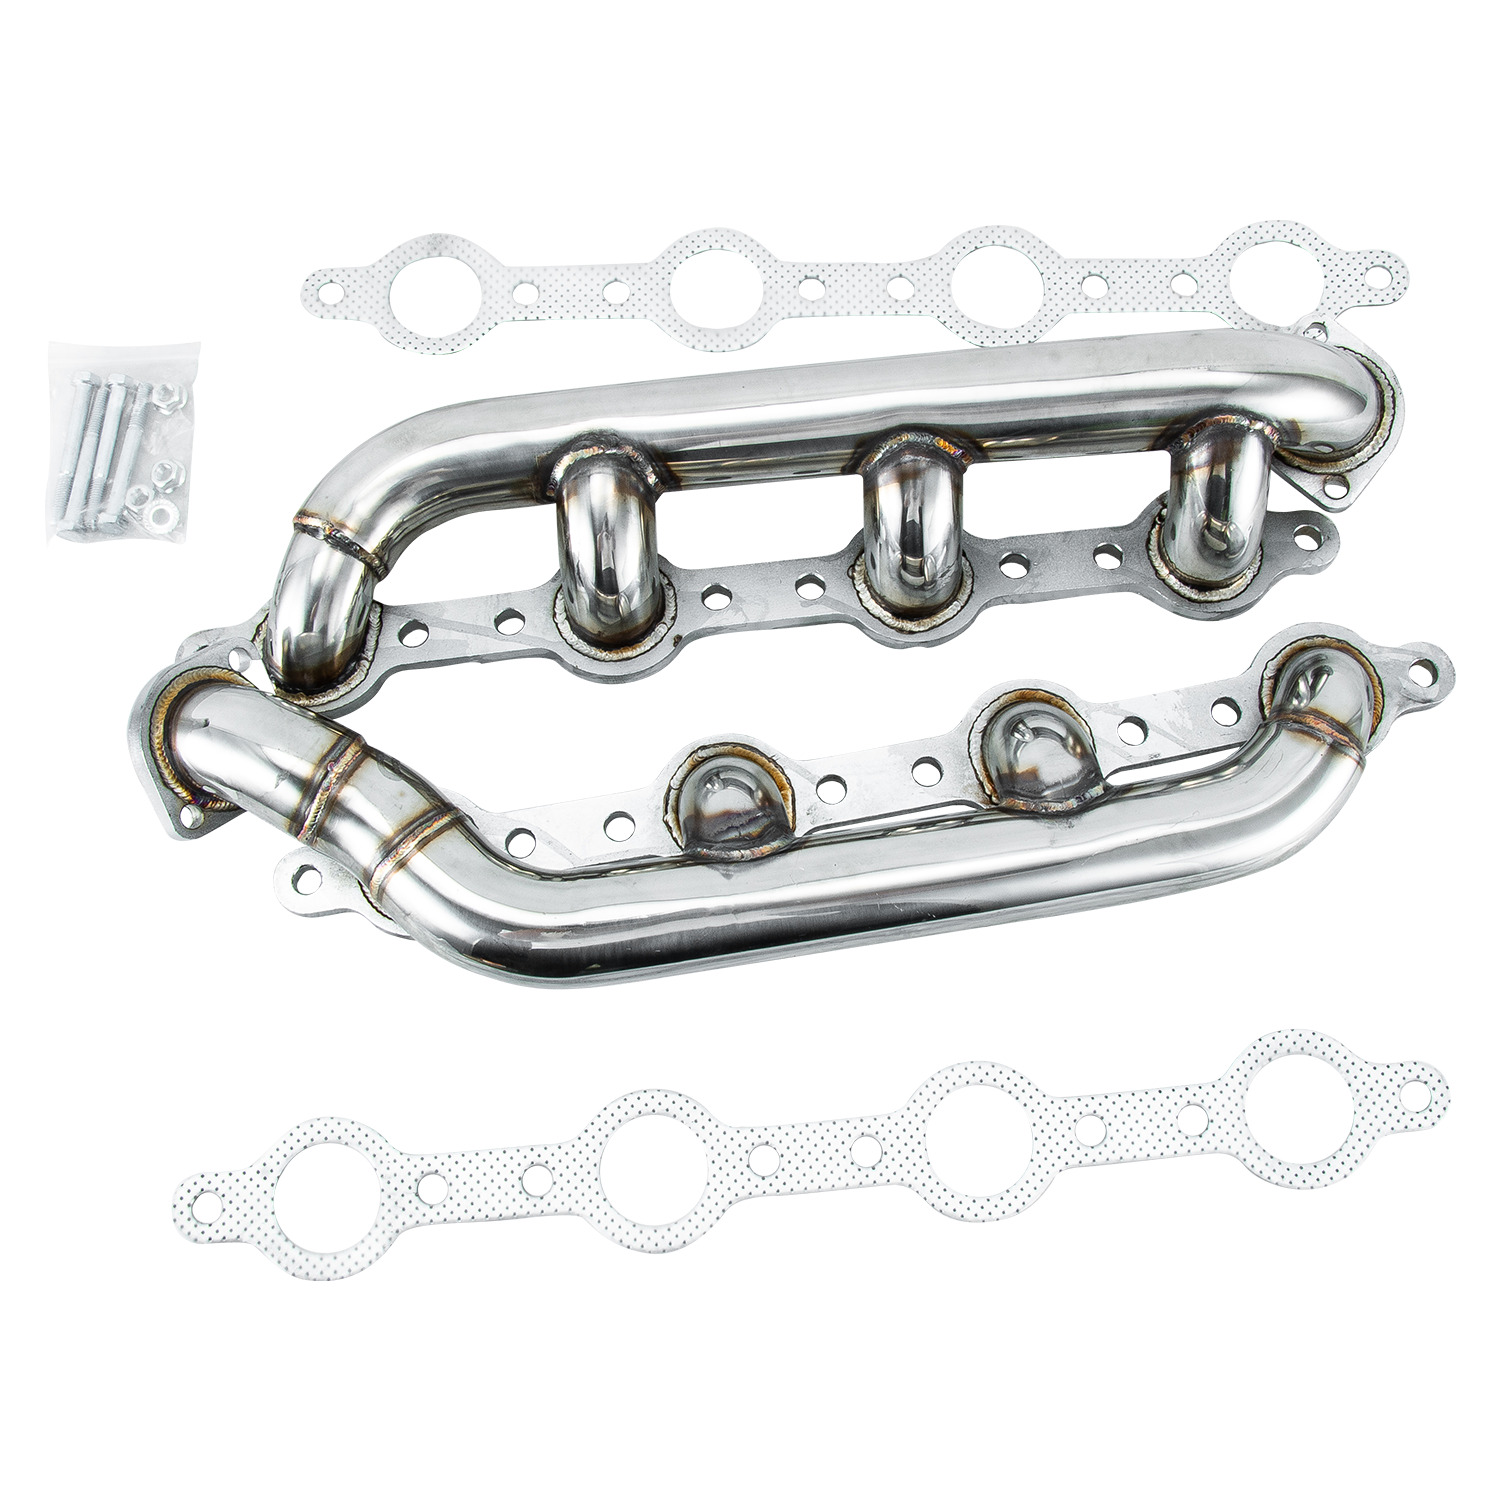 Stainless Steel Headers Manifolds For 1999-2003 2002 Ford F250 F350 F450 7.3L